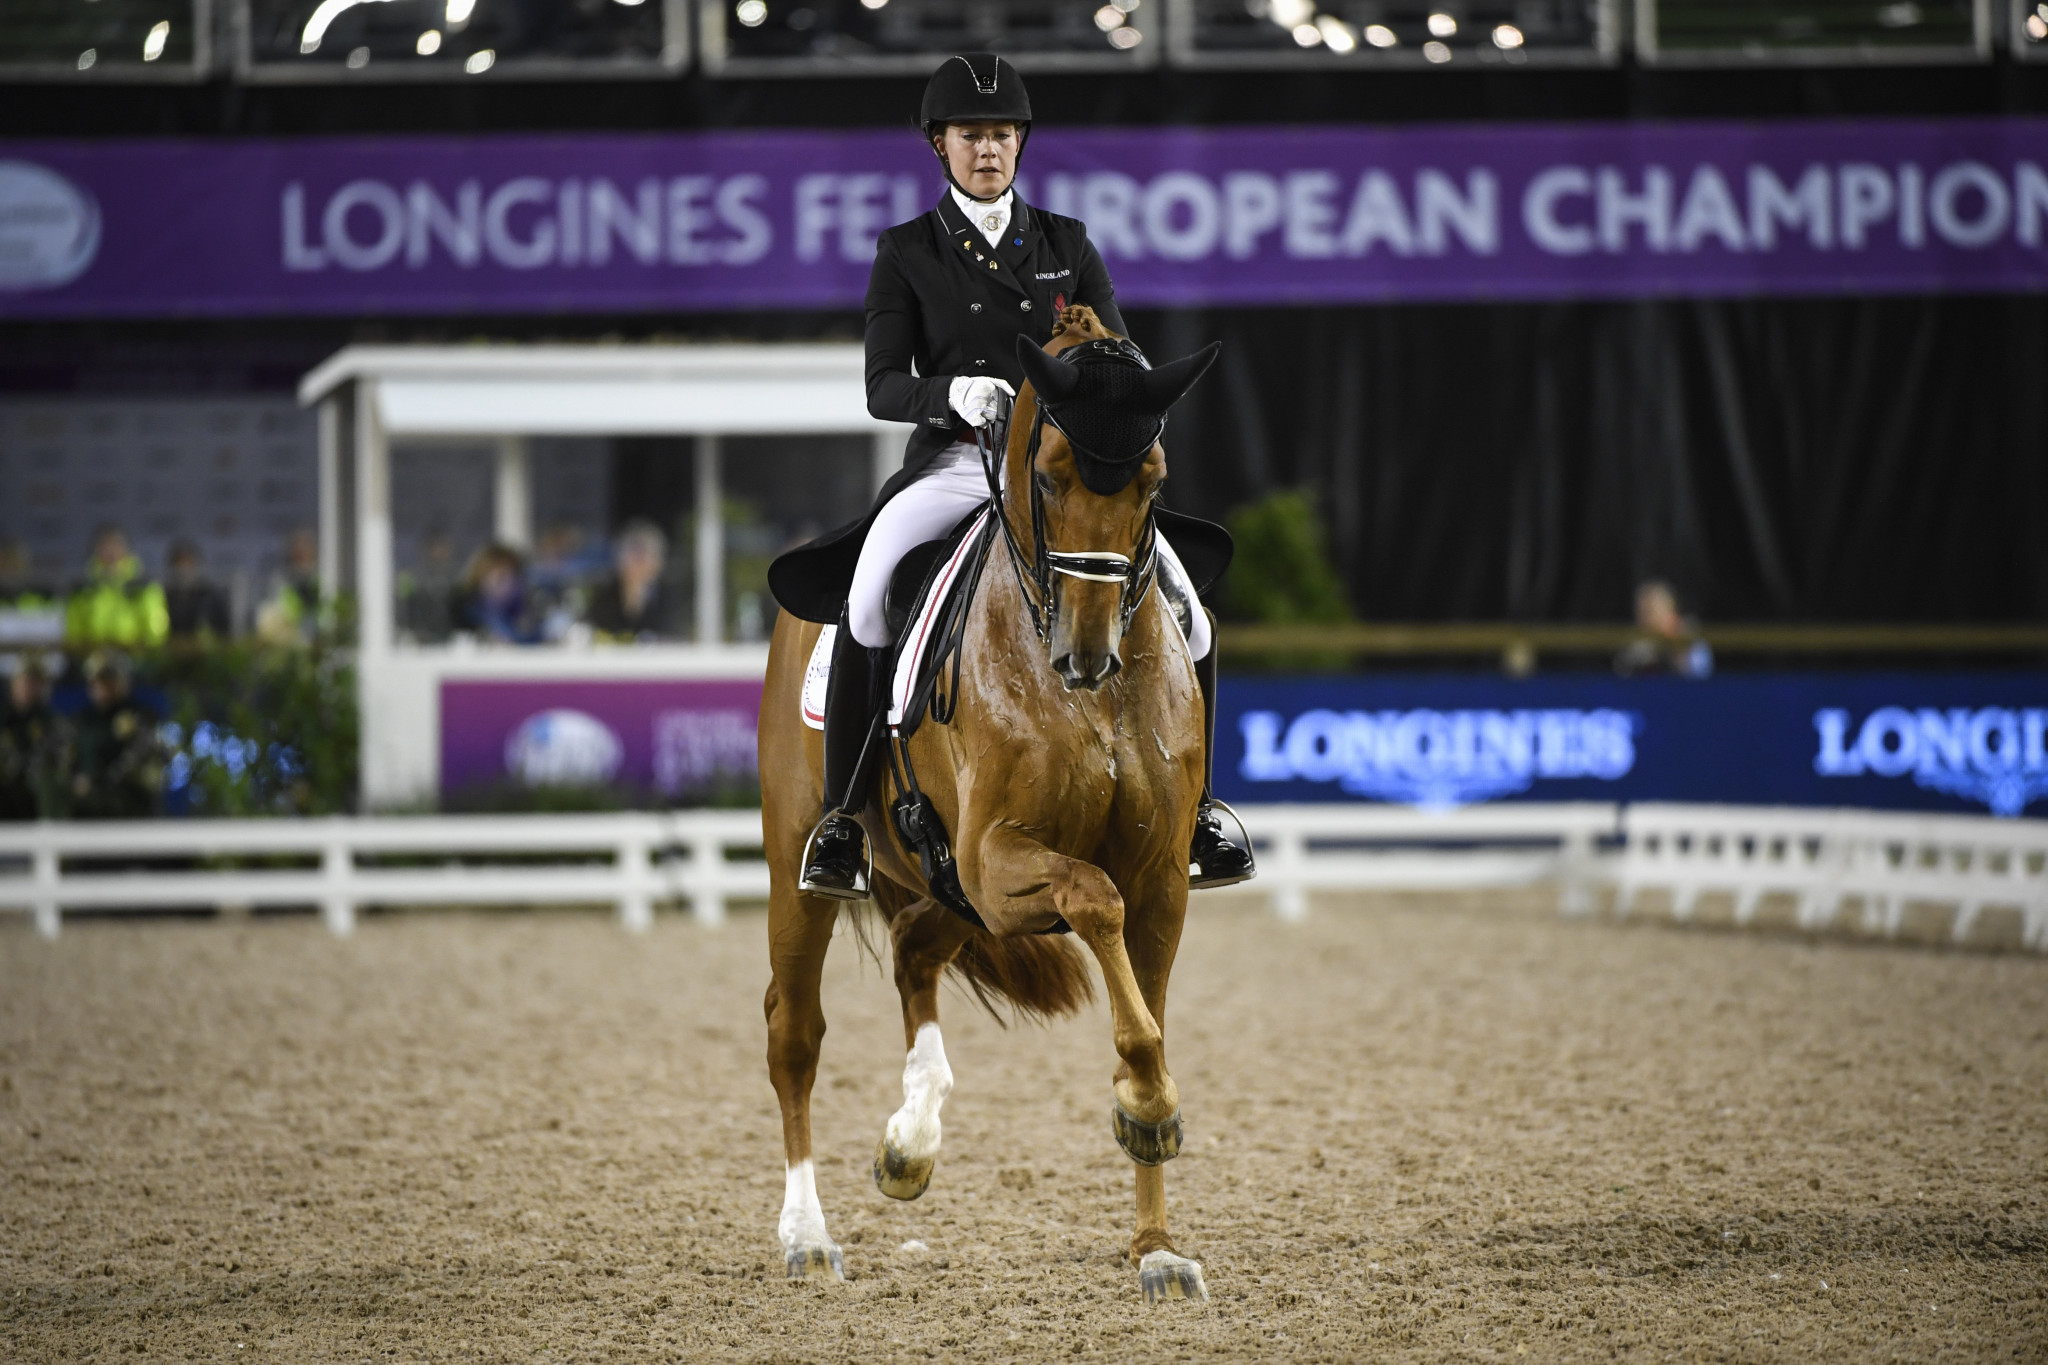 Dufour rides to home win at Dressage World Cup in Herning